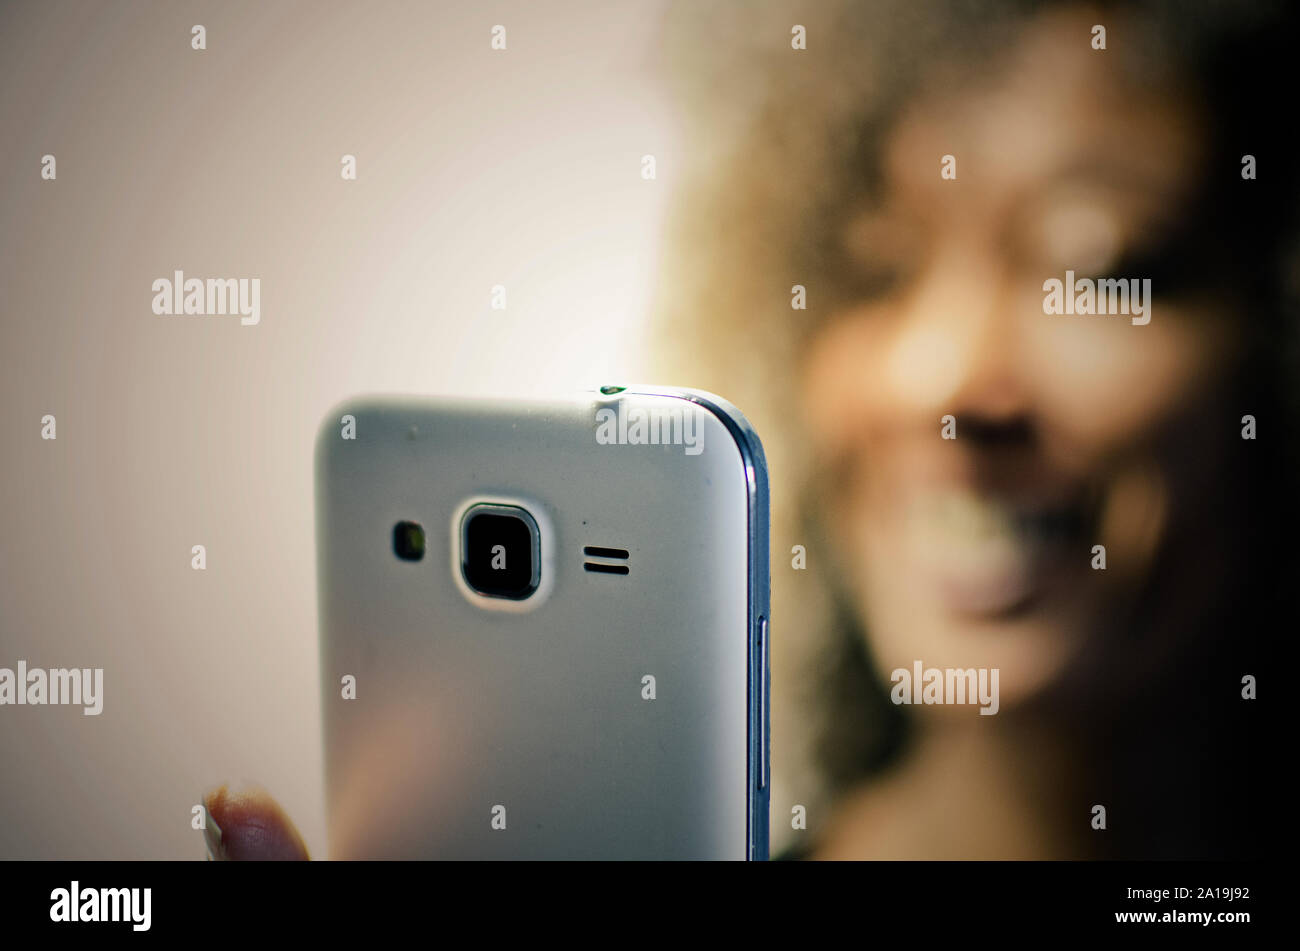 Smiling black woman looking at her phone. Selective focus on foreground. Blurred background. Stock Photo